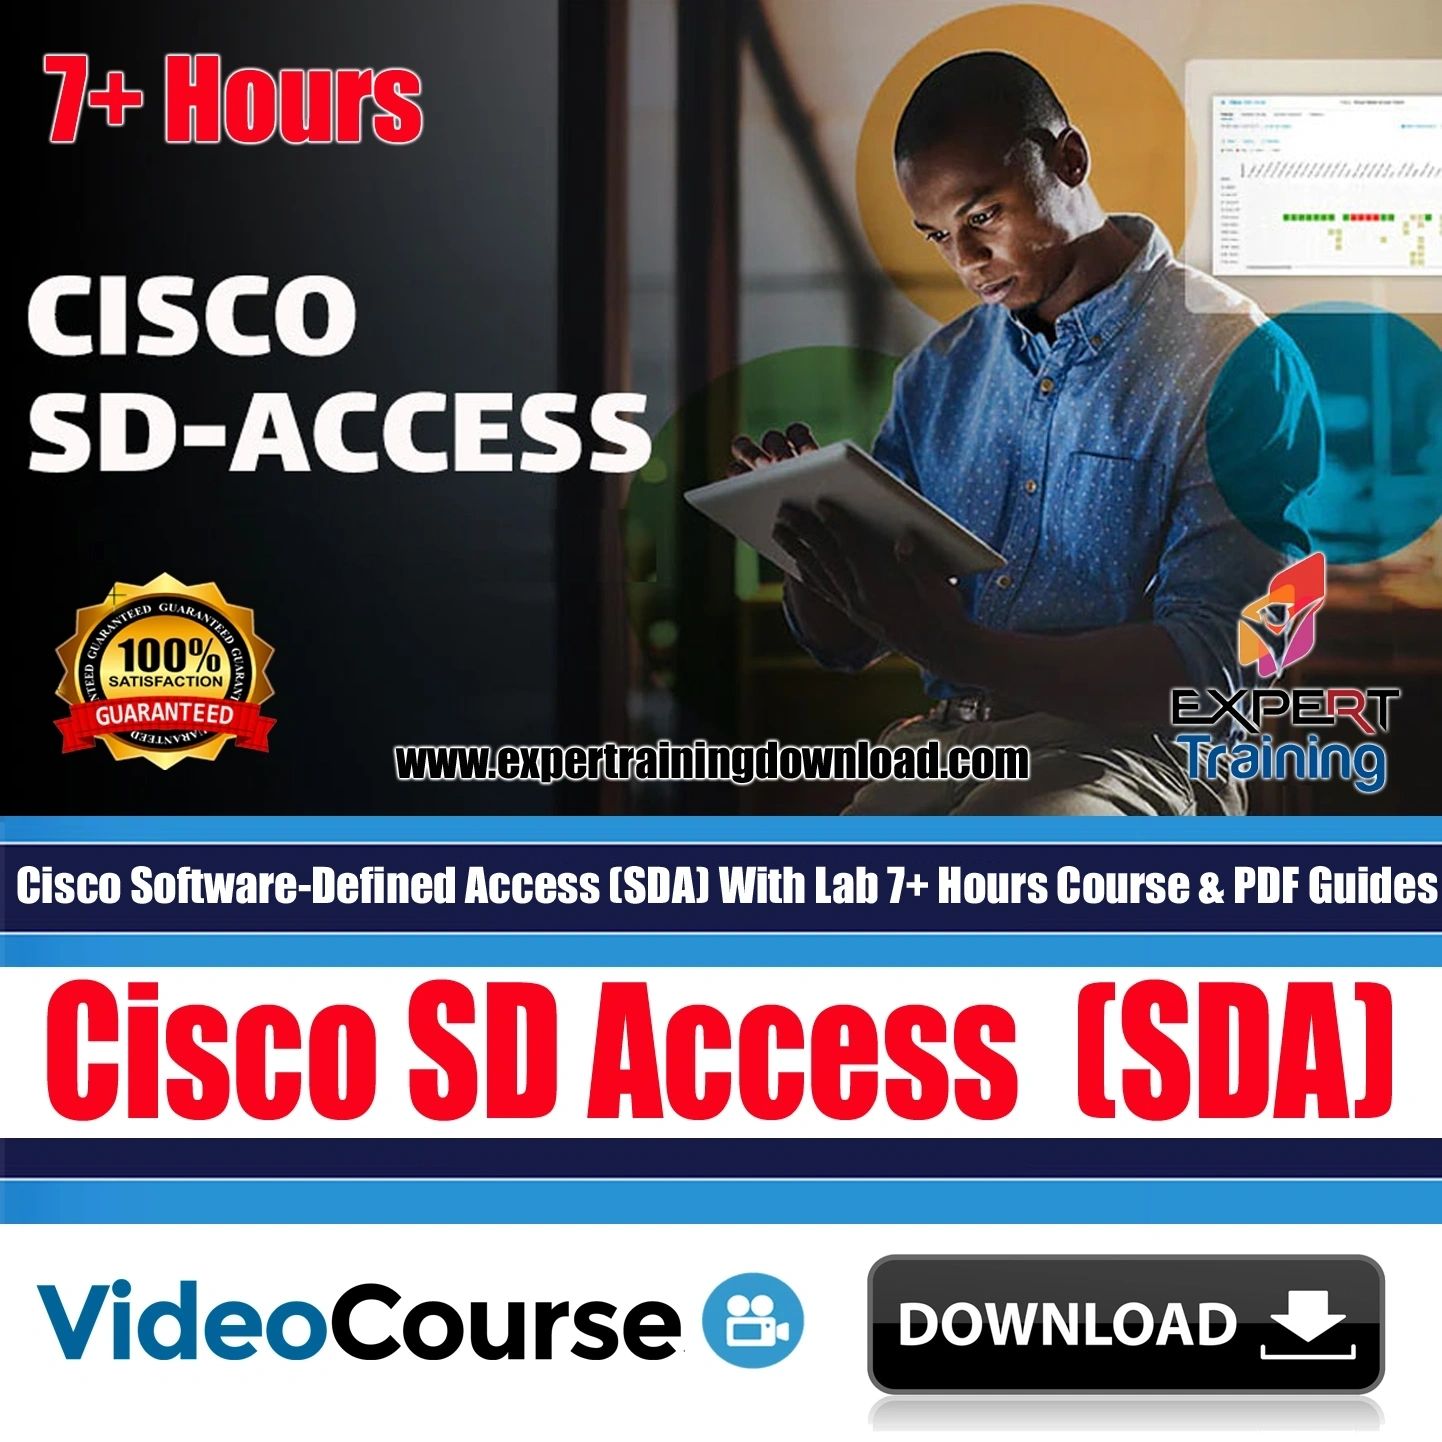 Cisco Software-Defined Access (SDA) With Lab 7+ Hours Course & PDF Guides